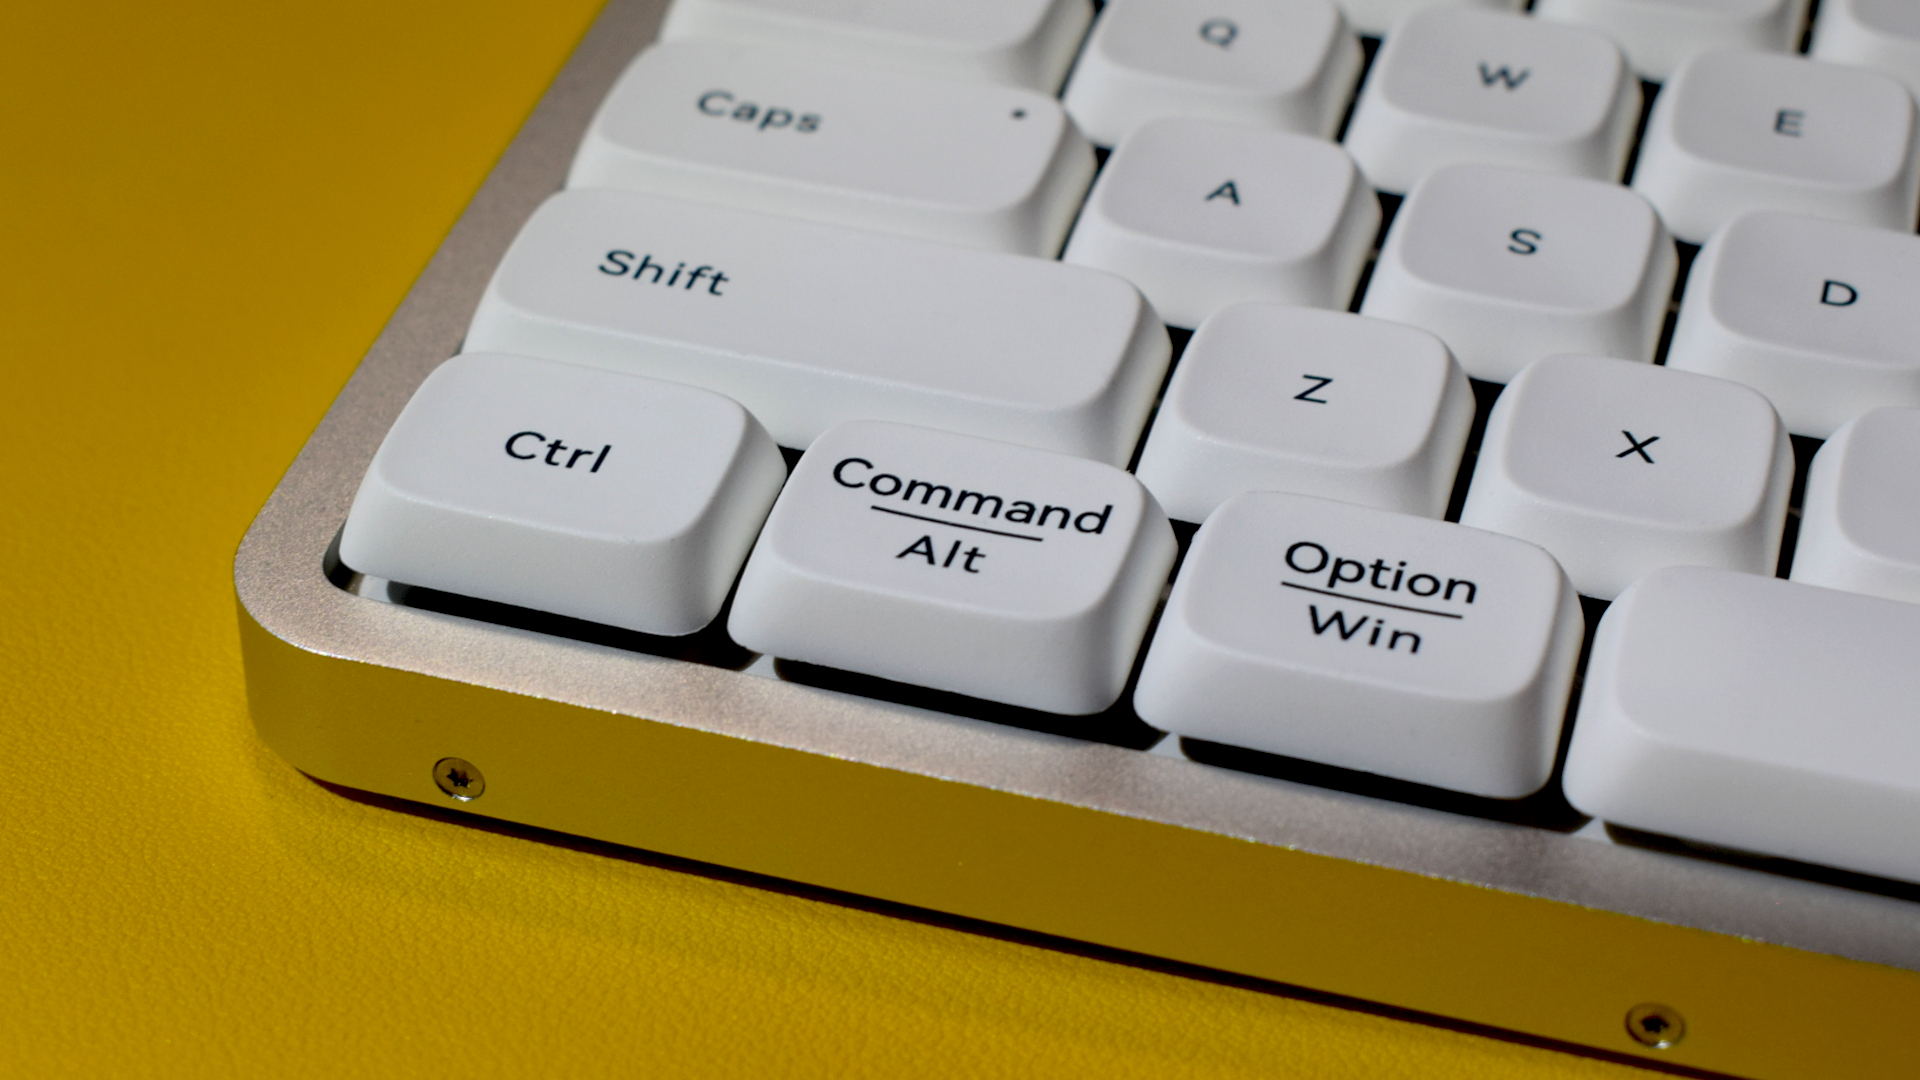 Lofree Flow mechanical wireless keyboard photograph showing Windows and macOS labelled keycap legends